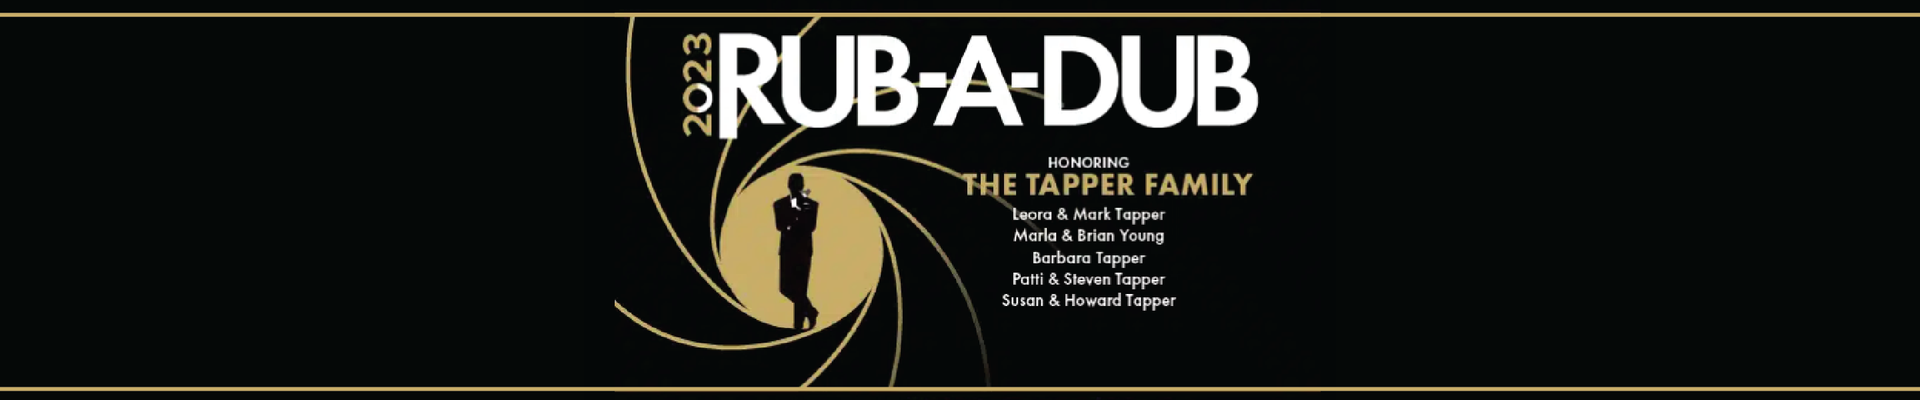 2023 Rub-A-Dub logo with honorees the Tapper's Family